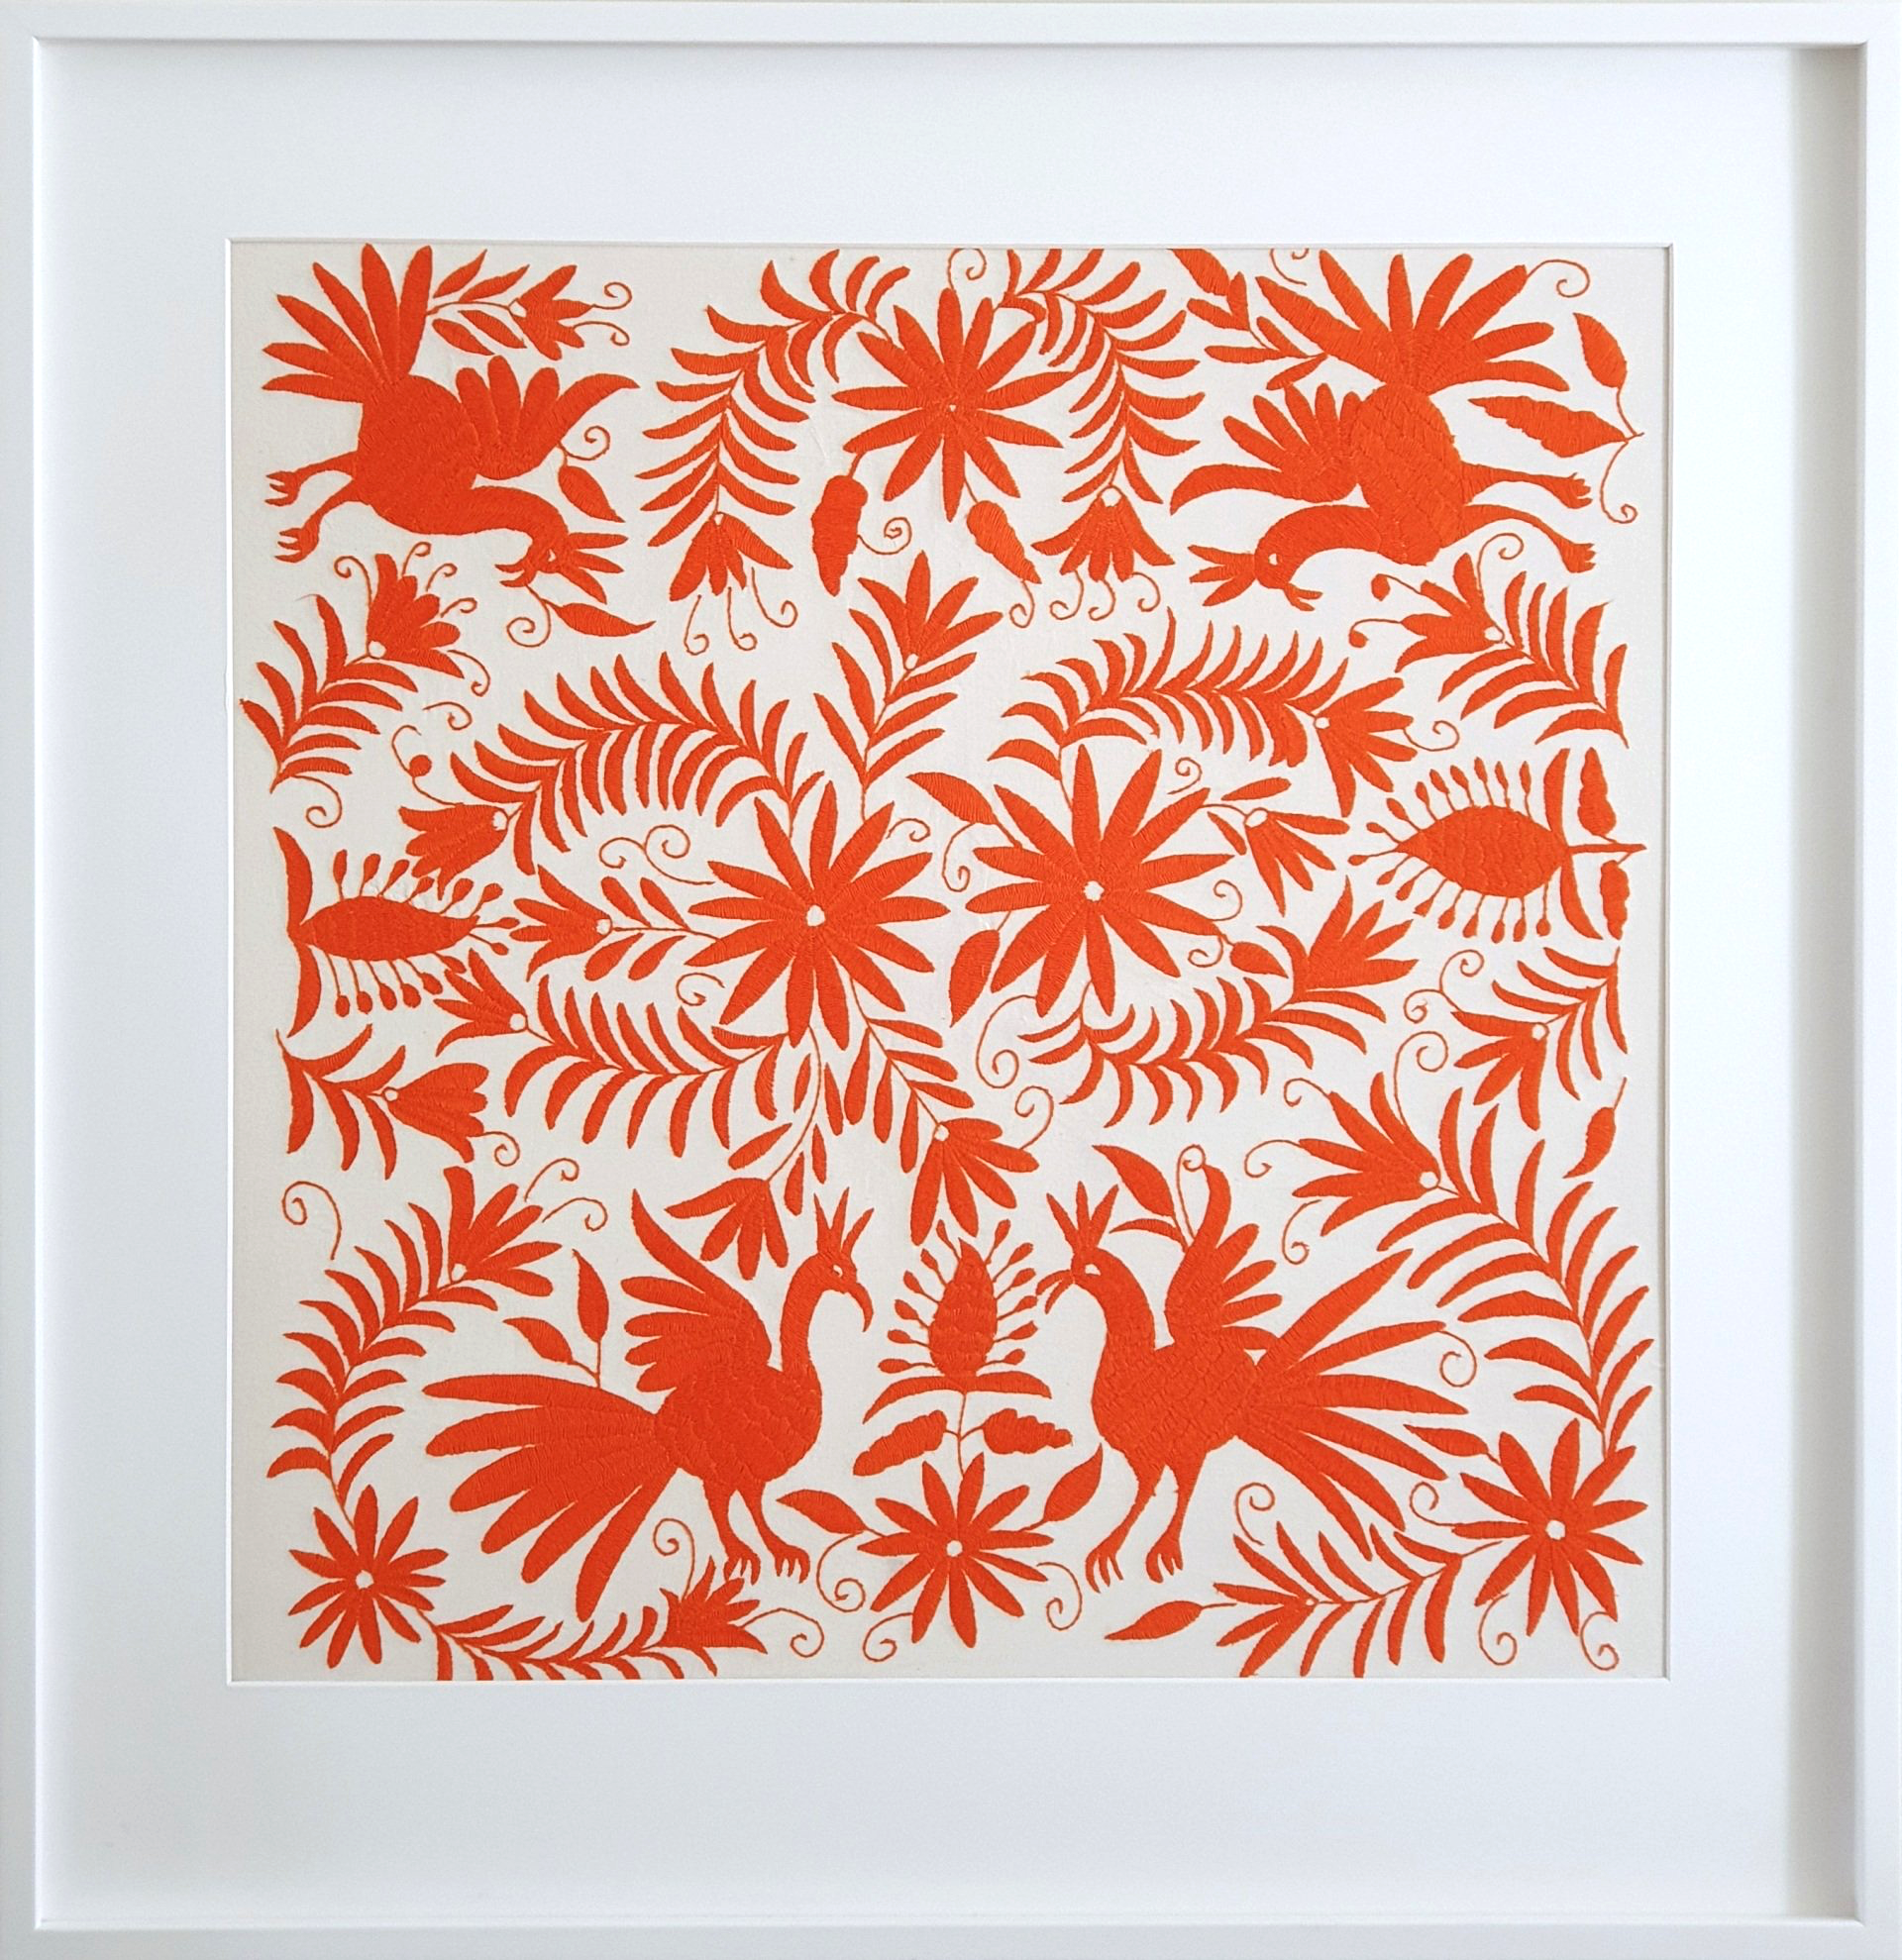 Otomi Art, Otomi Artwork, Otomi Embroidery, Otomi,Otomi Orange, This Otomi was designed by an artist and fully hand embroidered by an embroider, descendant of the Otomi, in the region of Tenango de Doria, Mexico, with their traditional and famous